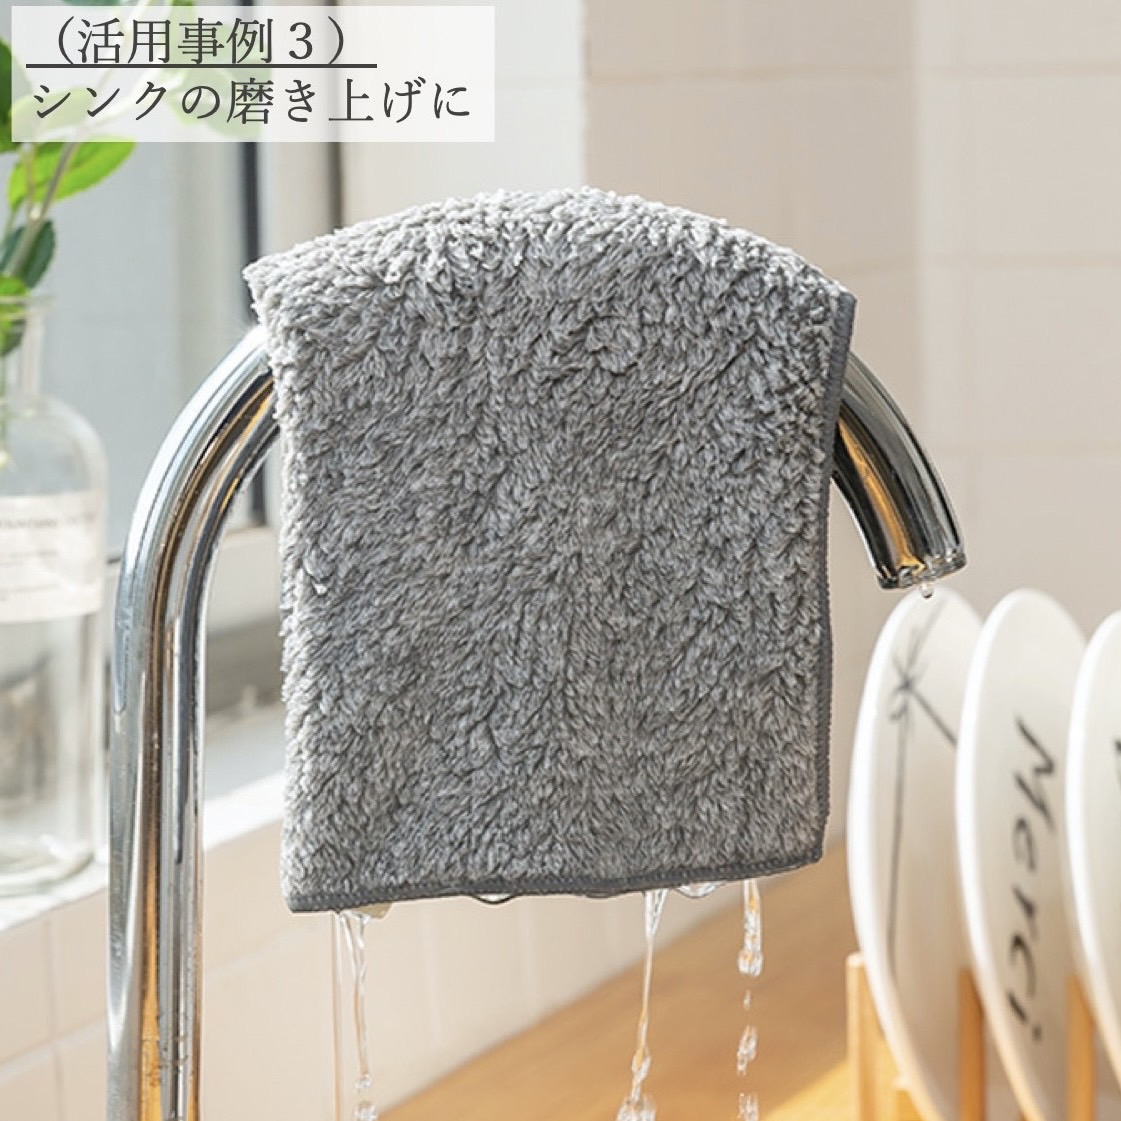  dish cloth cloth width tableware .. pcs dish cloth kitchen Cross duster Cross stylish Northern Europe tableware for duster Cross eat and drink shop . hydraulic power eminent 3 pieces set 